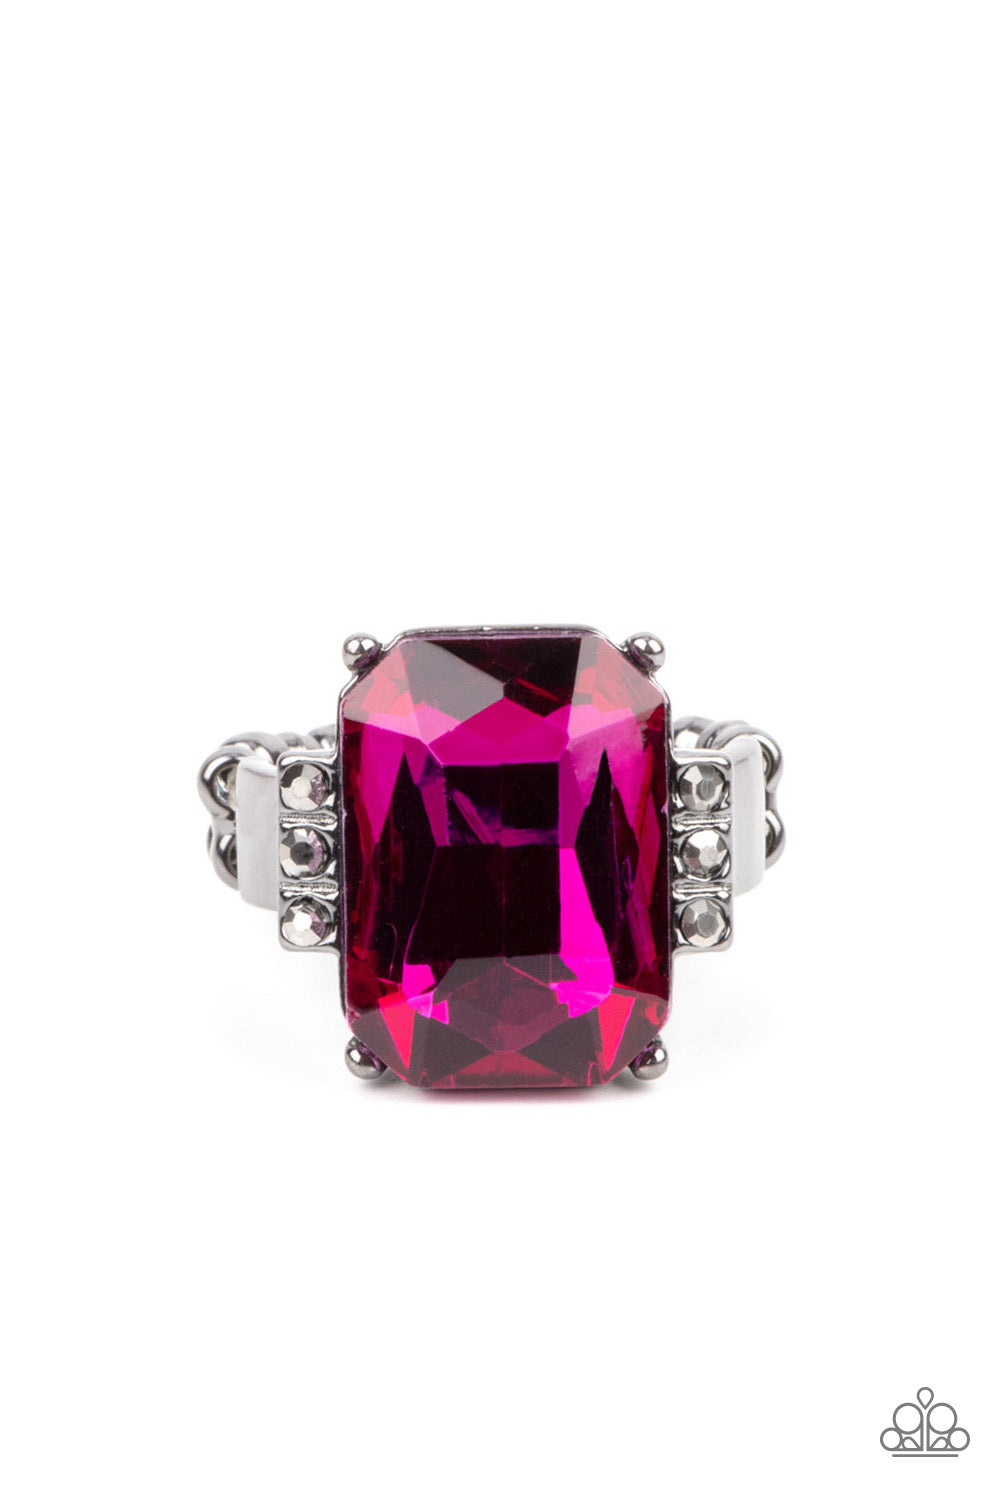 Epic Proportions - Pink Oversized Emerald Cut Gem Paparazzi Ring